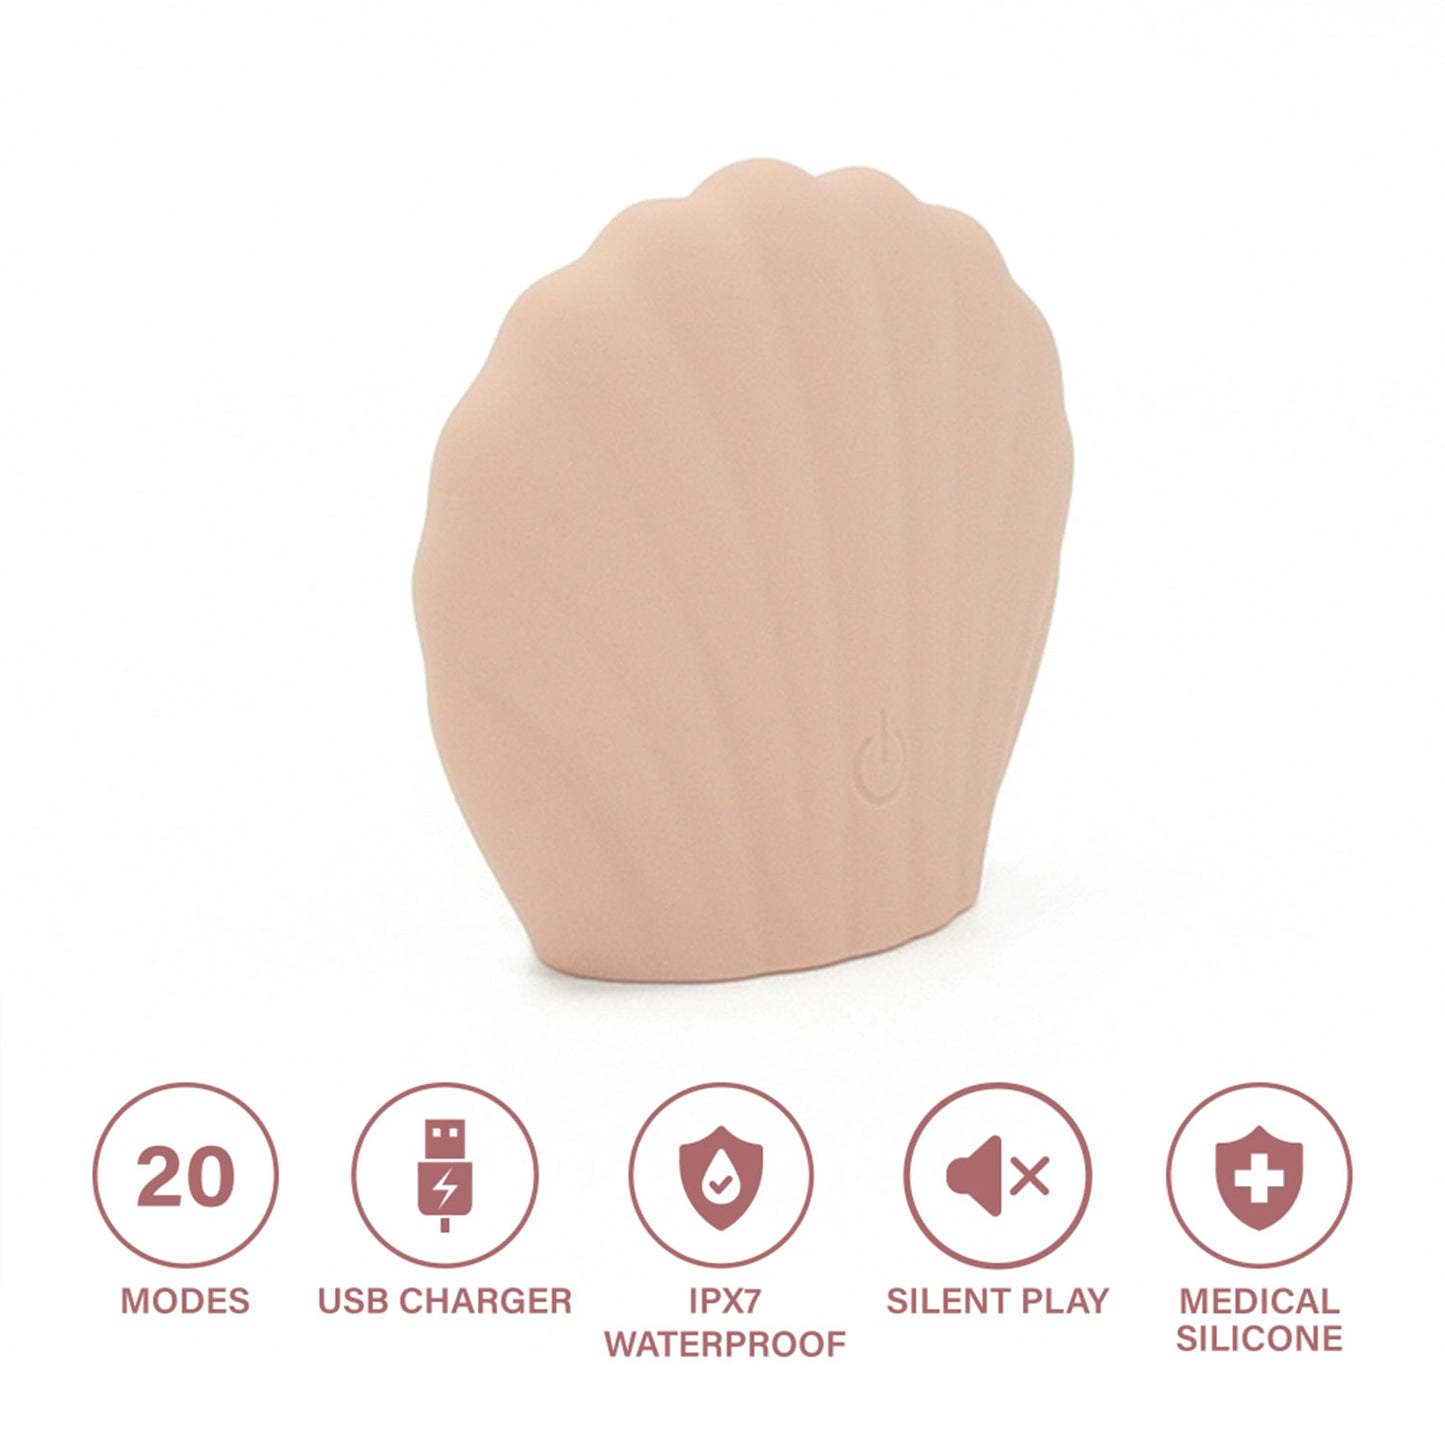 The Horny Company - Blush Blossom Collection Rechargeable Mermaid Vibrating Seashell Massager